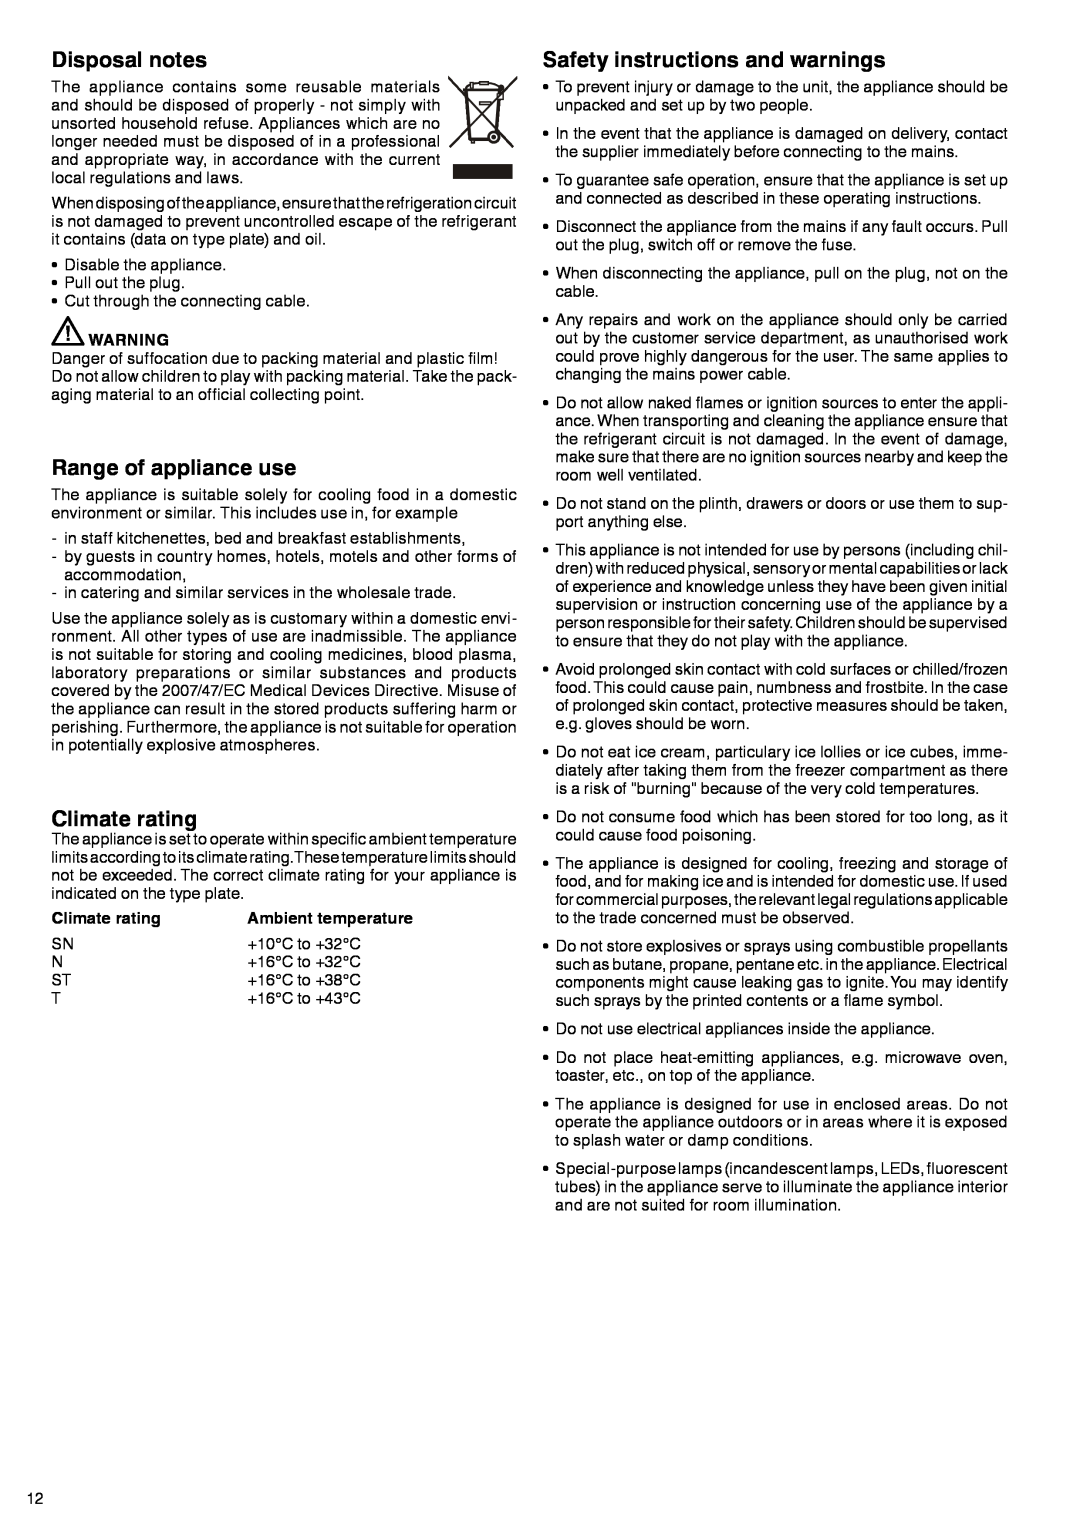 Liebherr 7082 135-00 manual Disposal notes, Range of appliance use, Climate rating, Safety instructions and warnings 